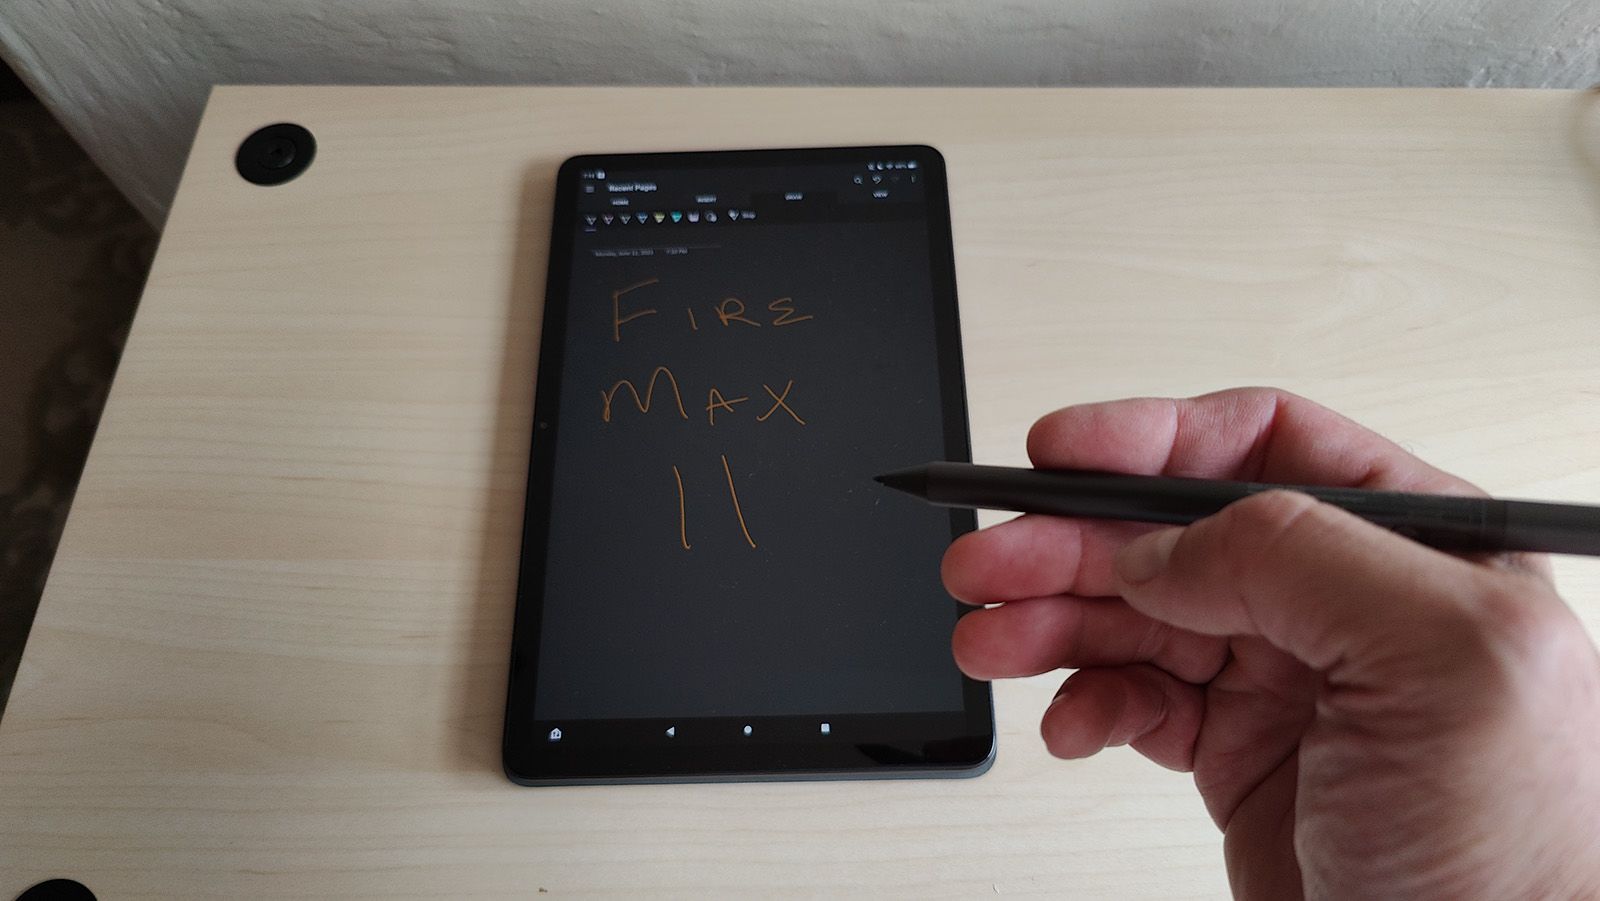 Xiaomi Pad 6 (artist review): Great tablet but pen has line